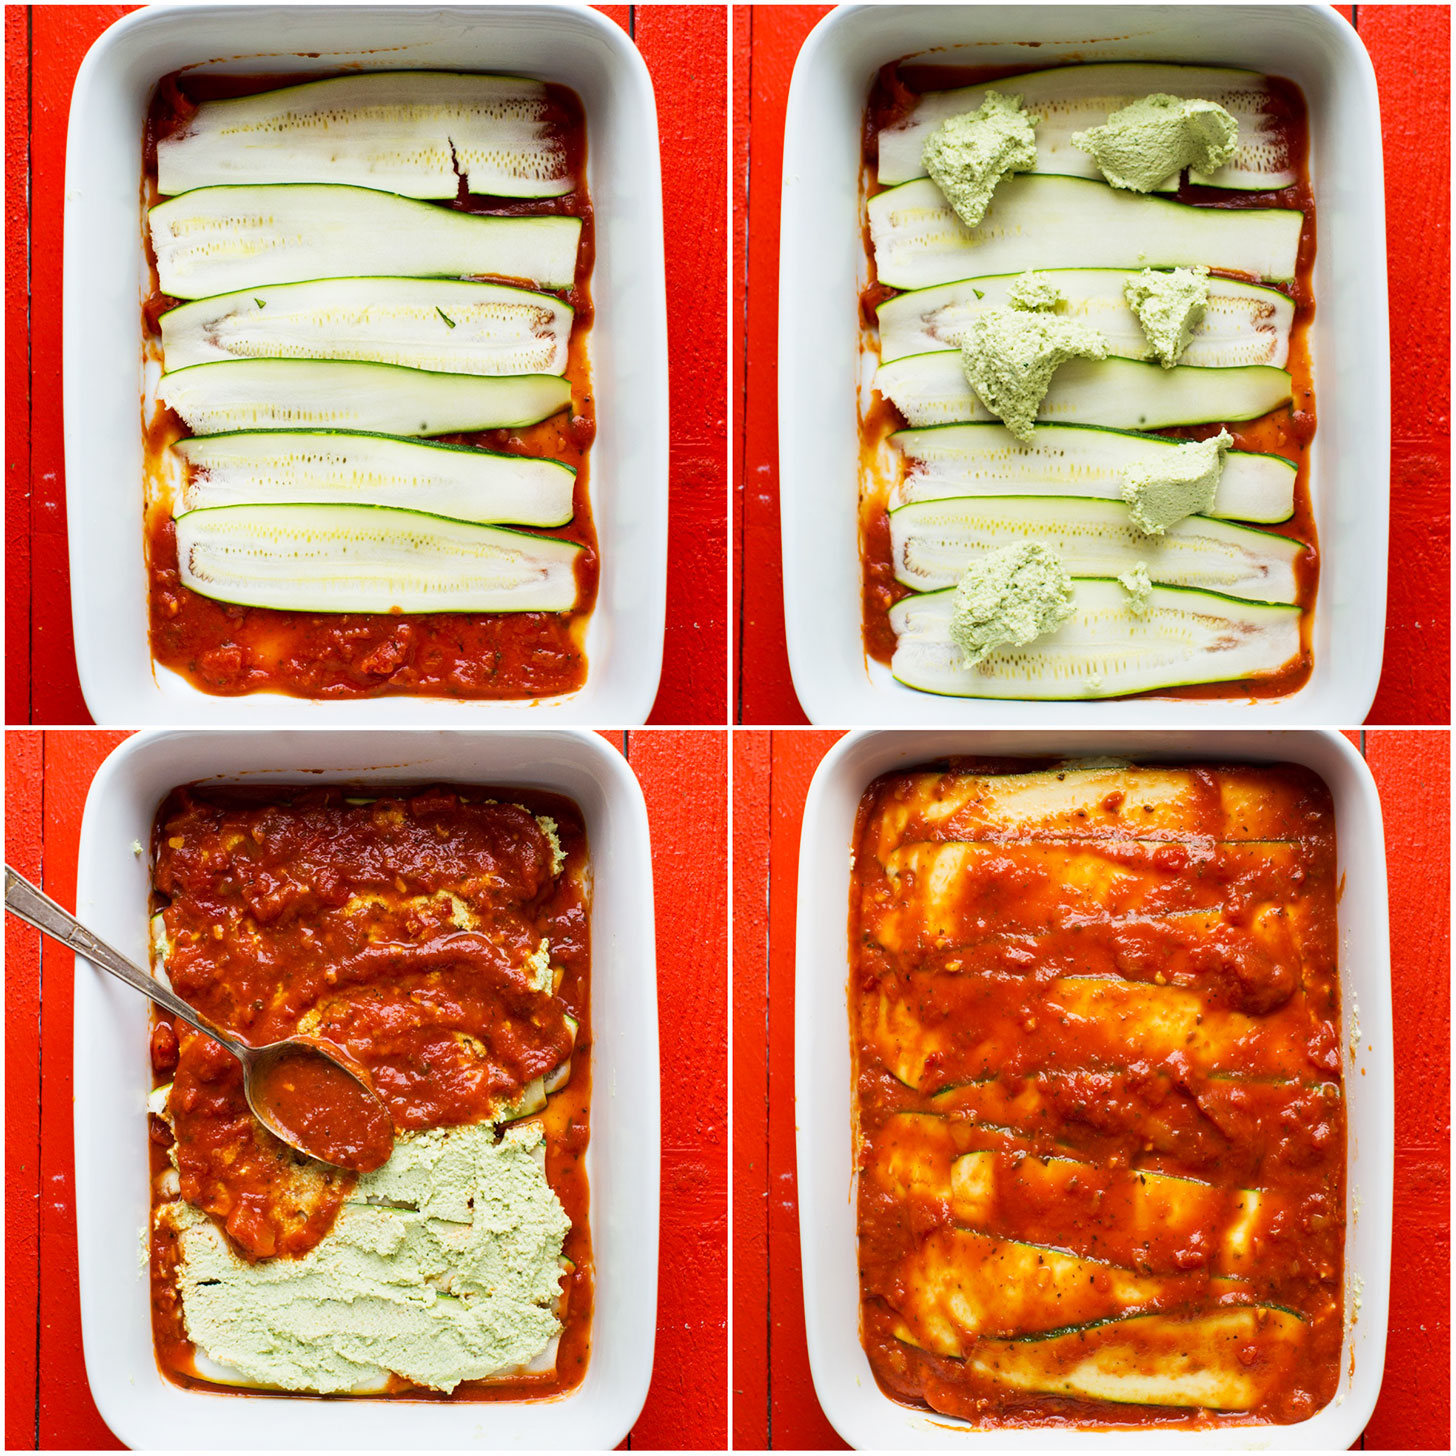 Photos showing the layers in our gluten-free vegan zucchini lasagna recipe